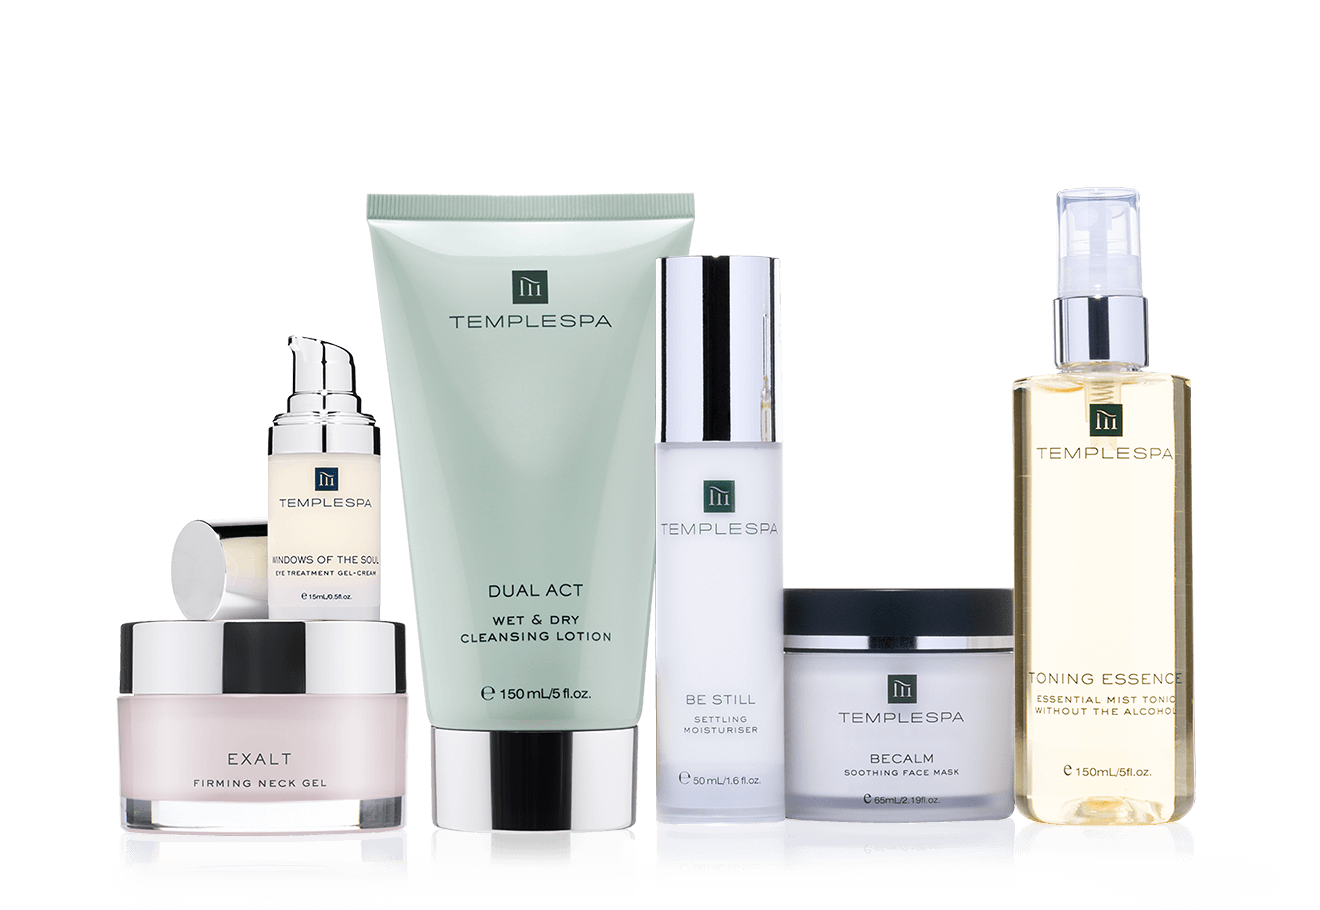 Temple Spa Products